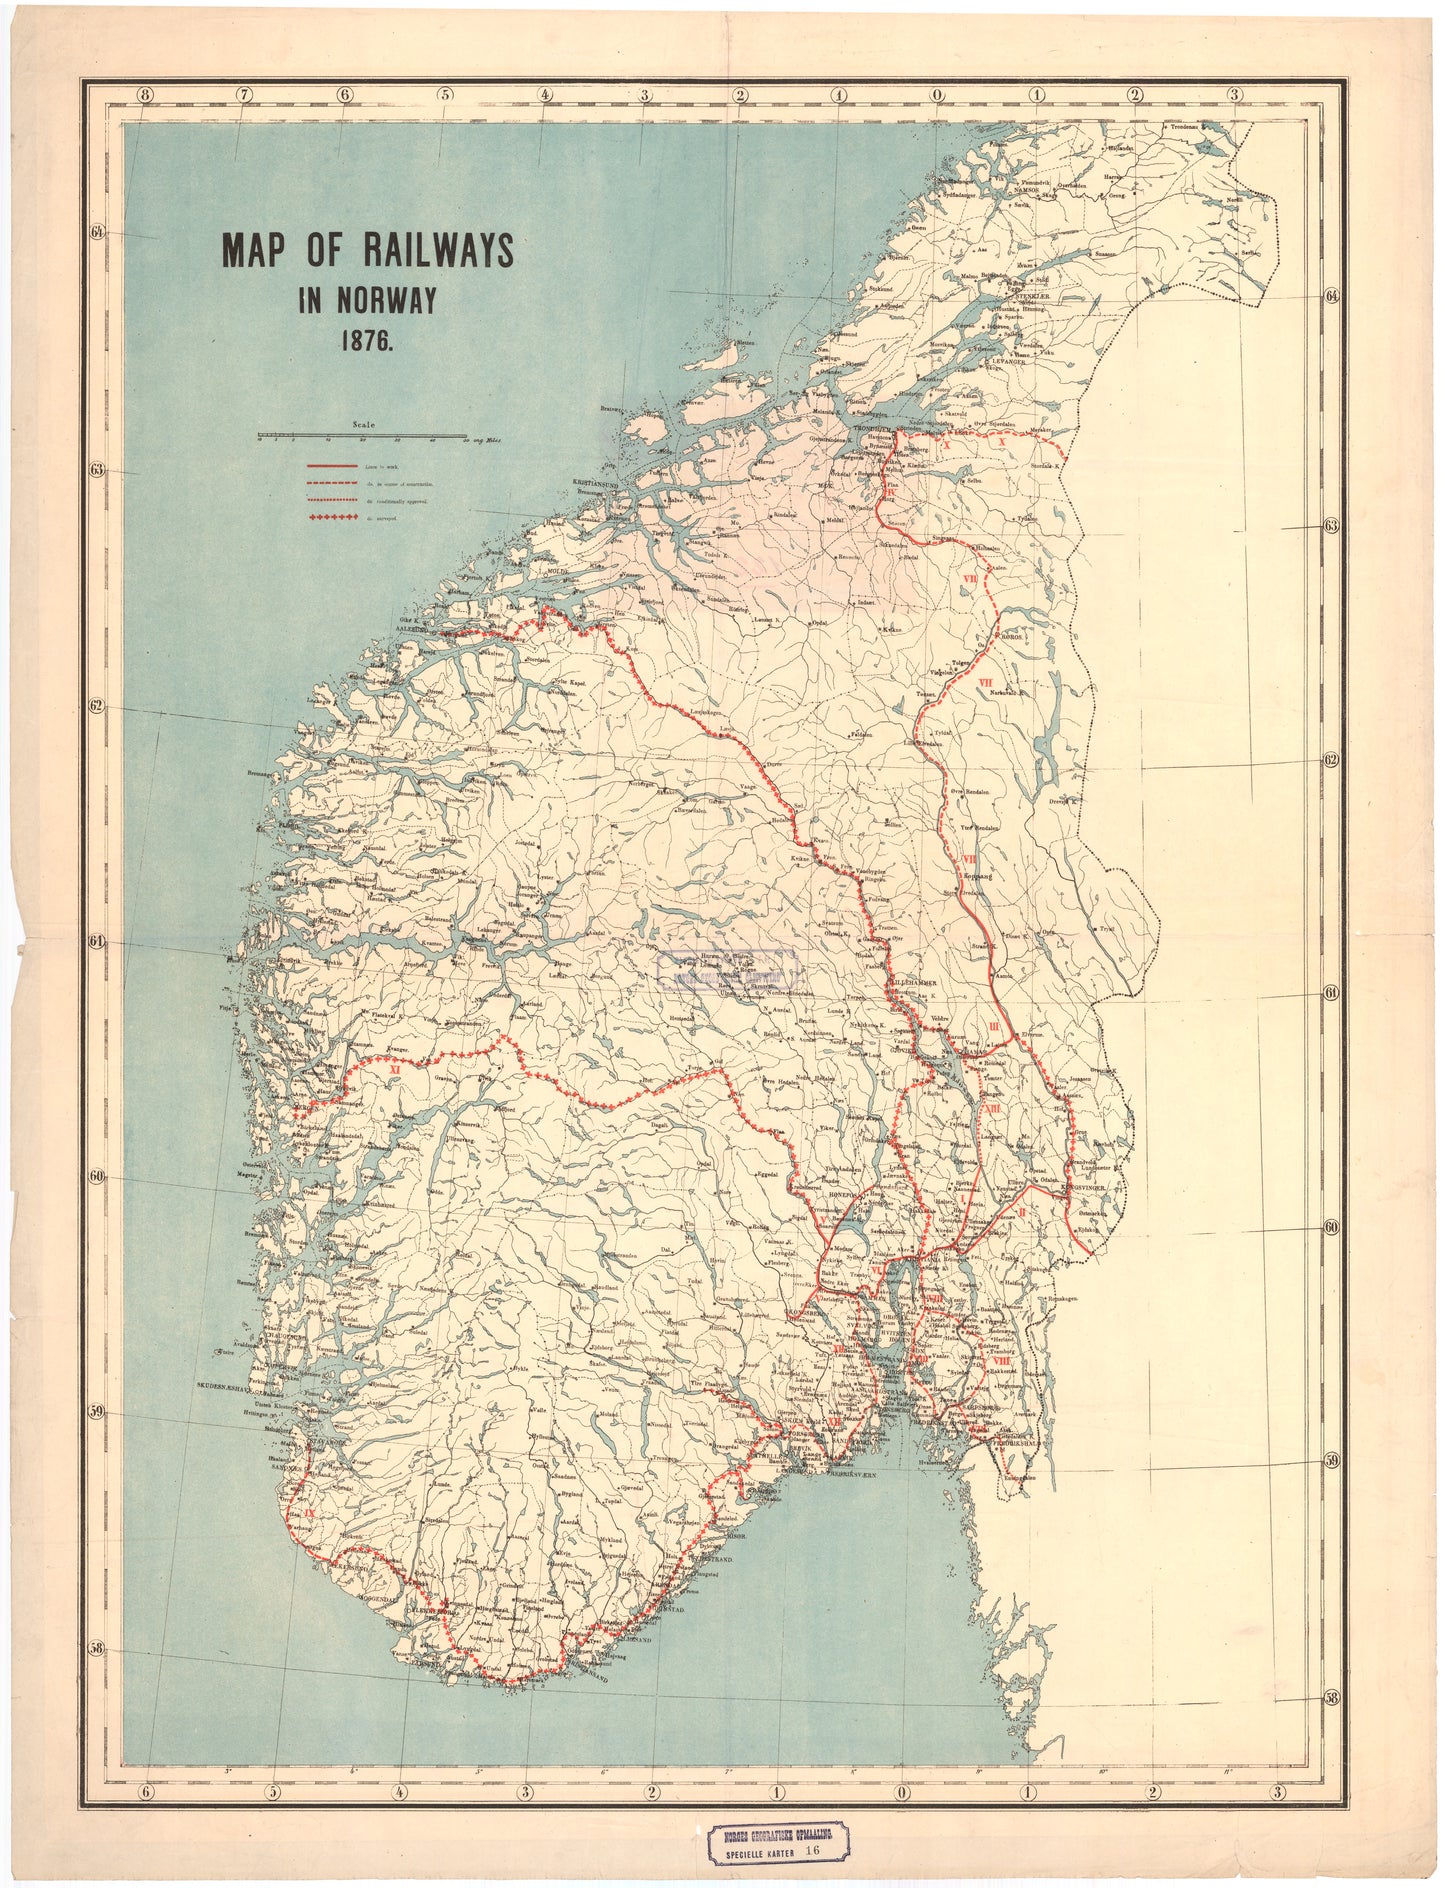 Map of railways in Norway: Norge